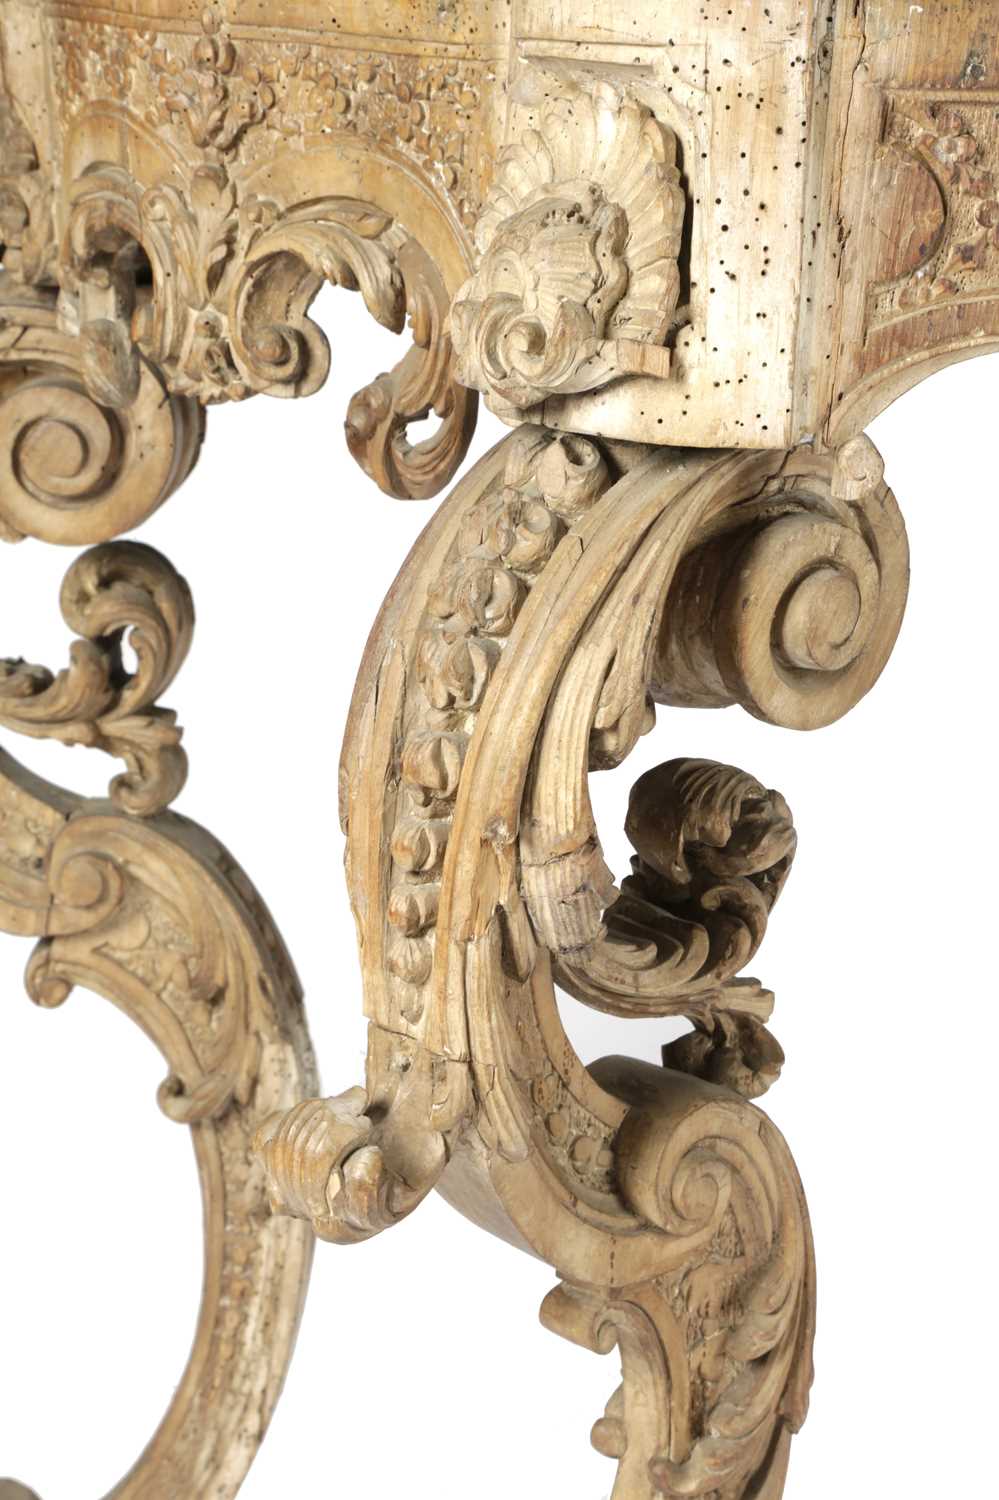 A ROCOCO CARVED WALNUT CONSOLE TABLE POSSIBLY GERMAN OR ITALIAN, 18TH CENTURY AND LATER the later - Image 3 of 6